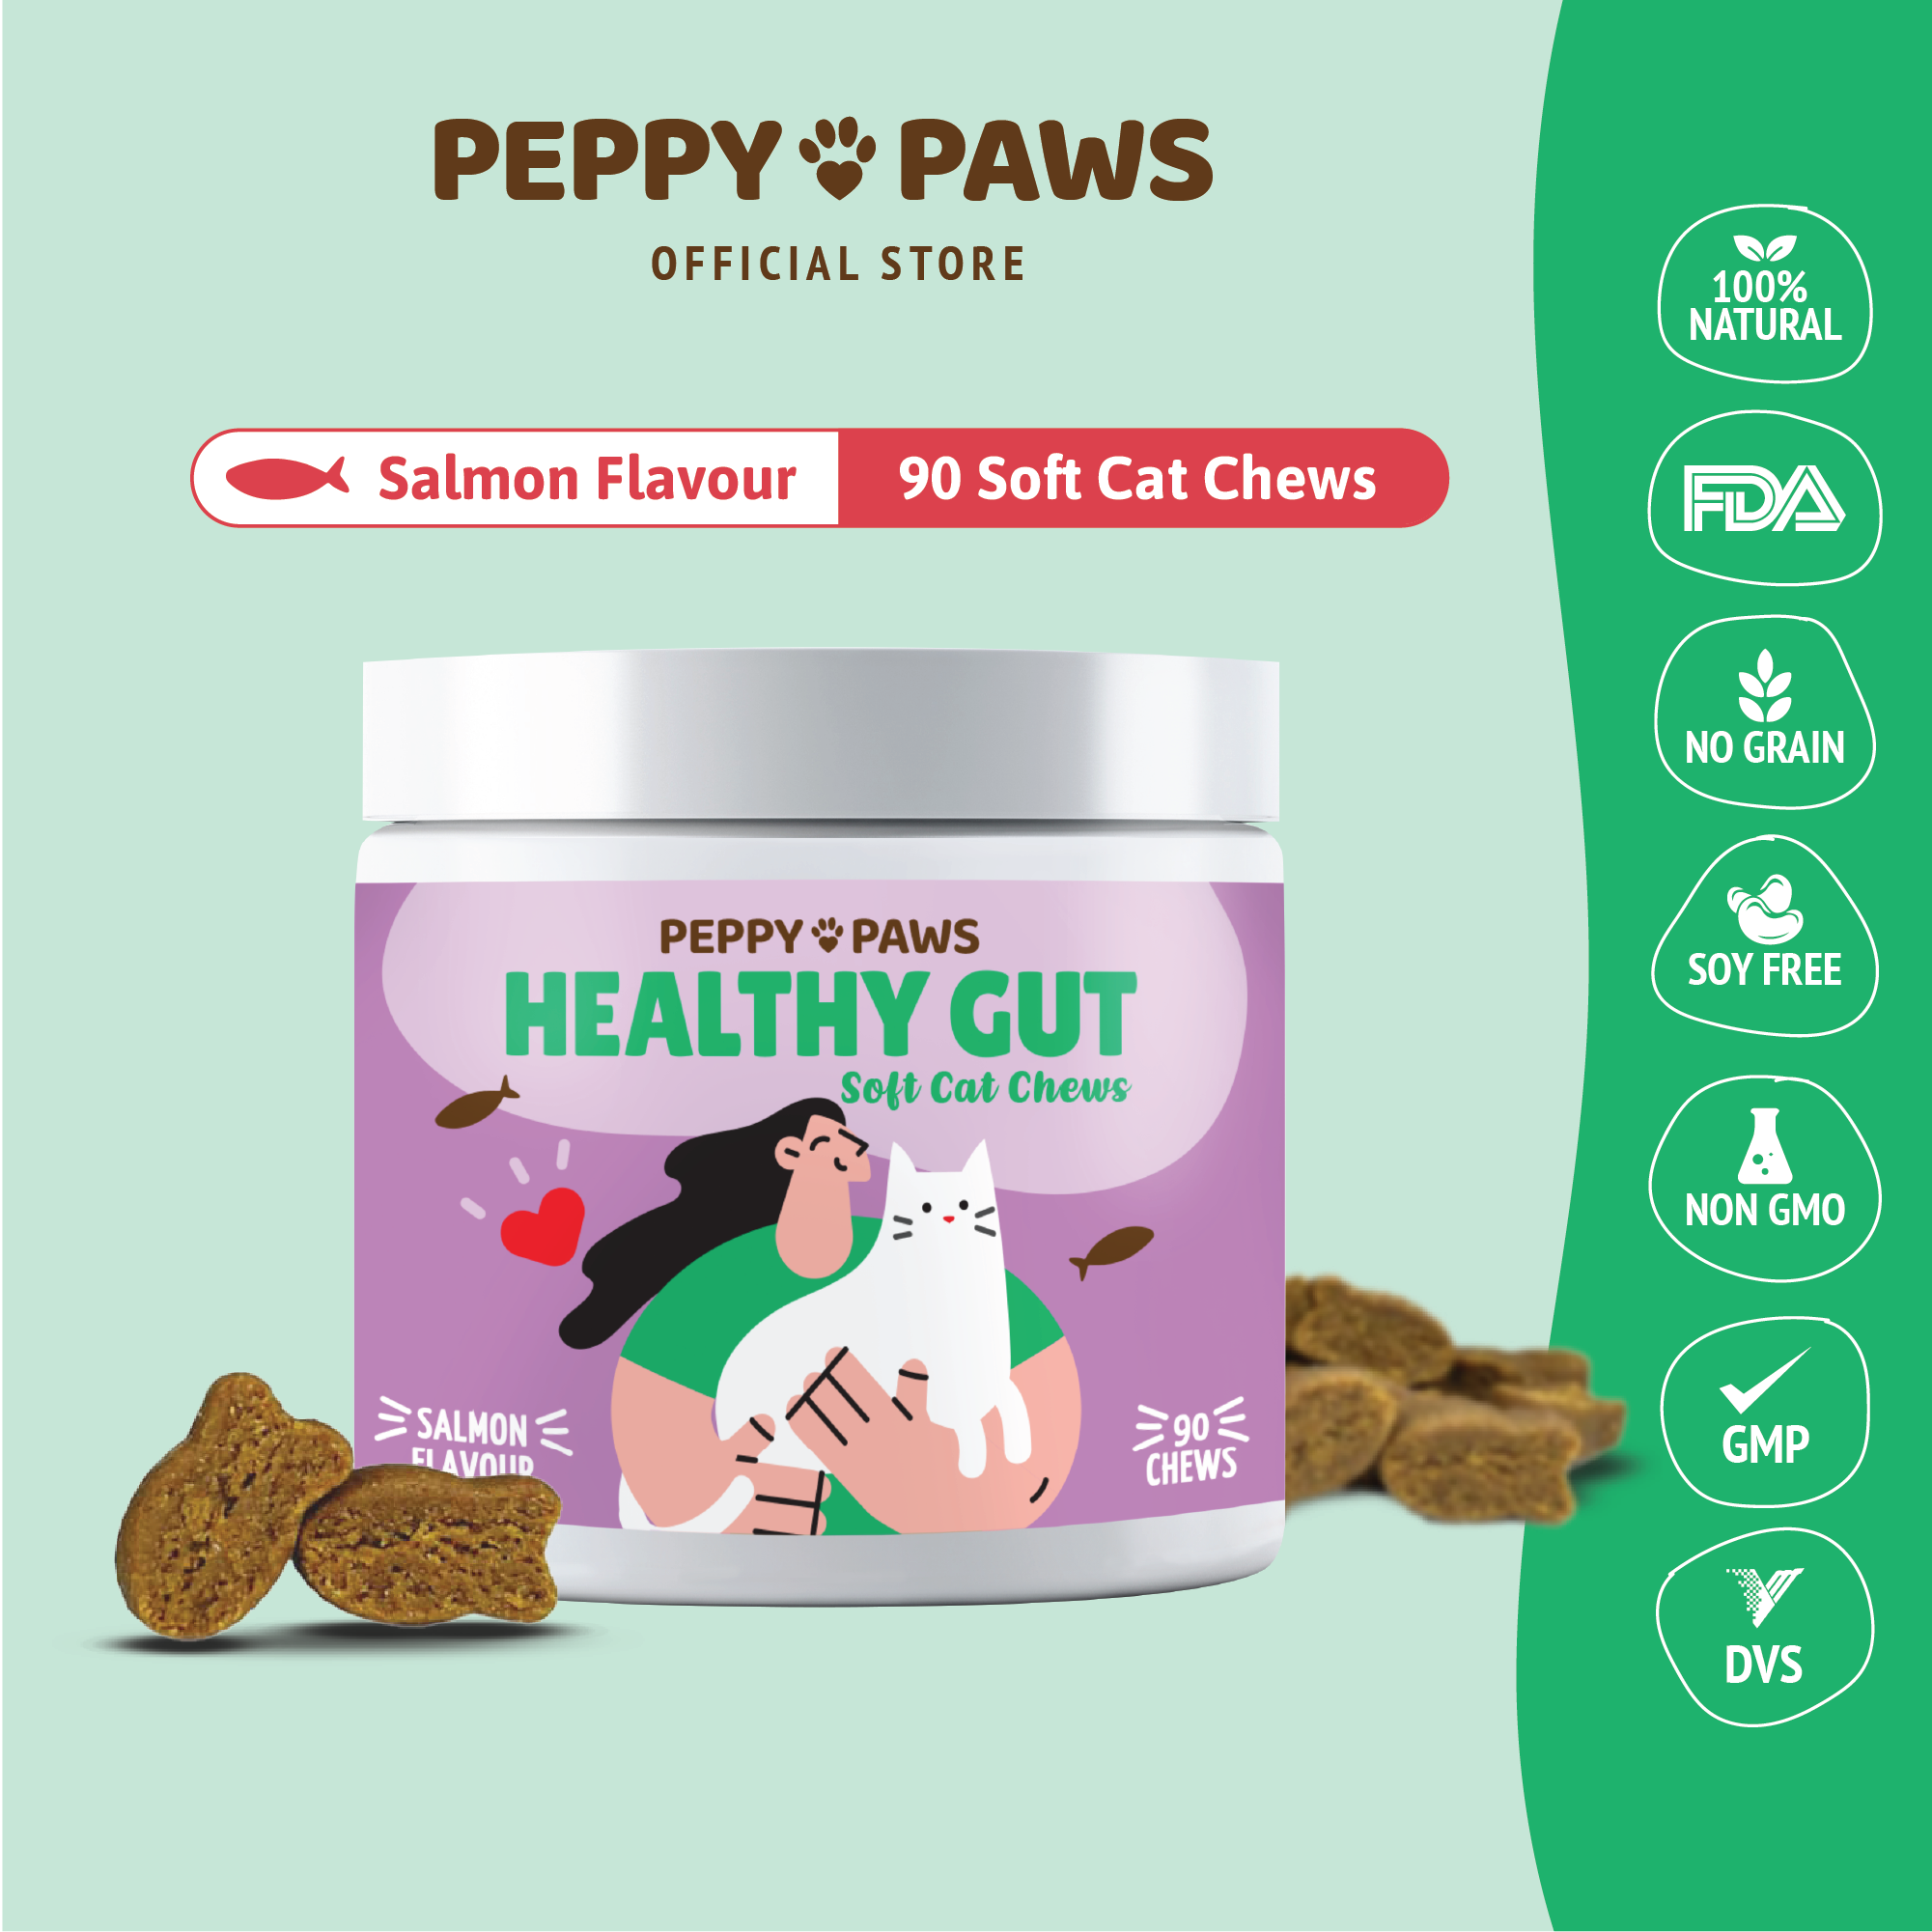 Peppy Paws Healthy Gut Soft Cats Chews (90 Chews)